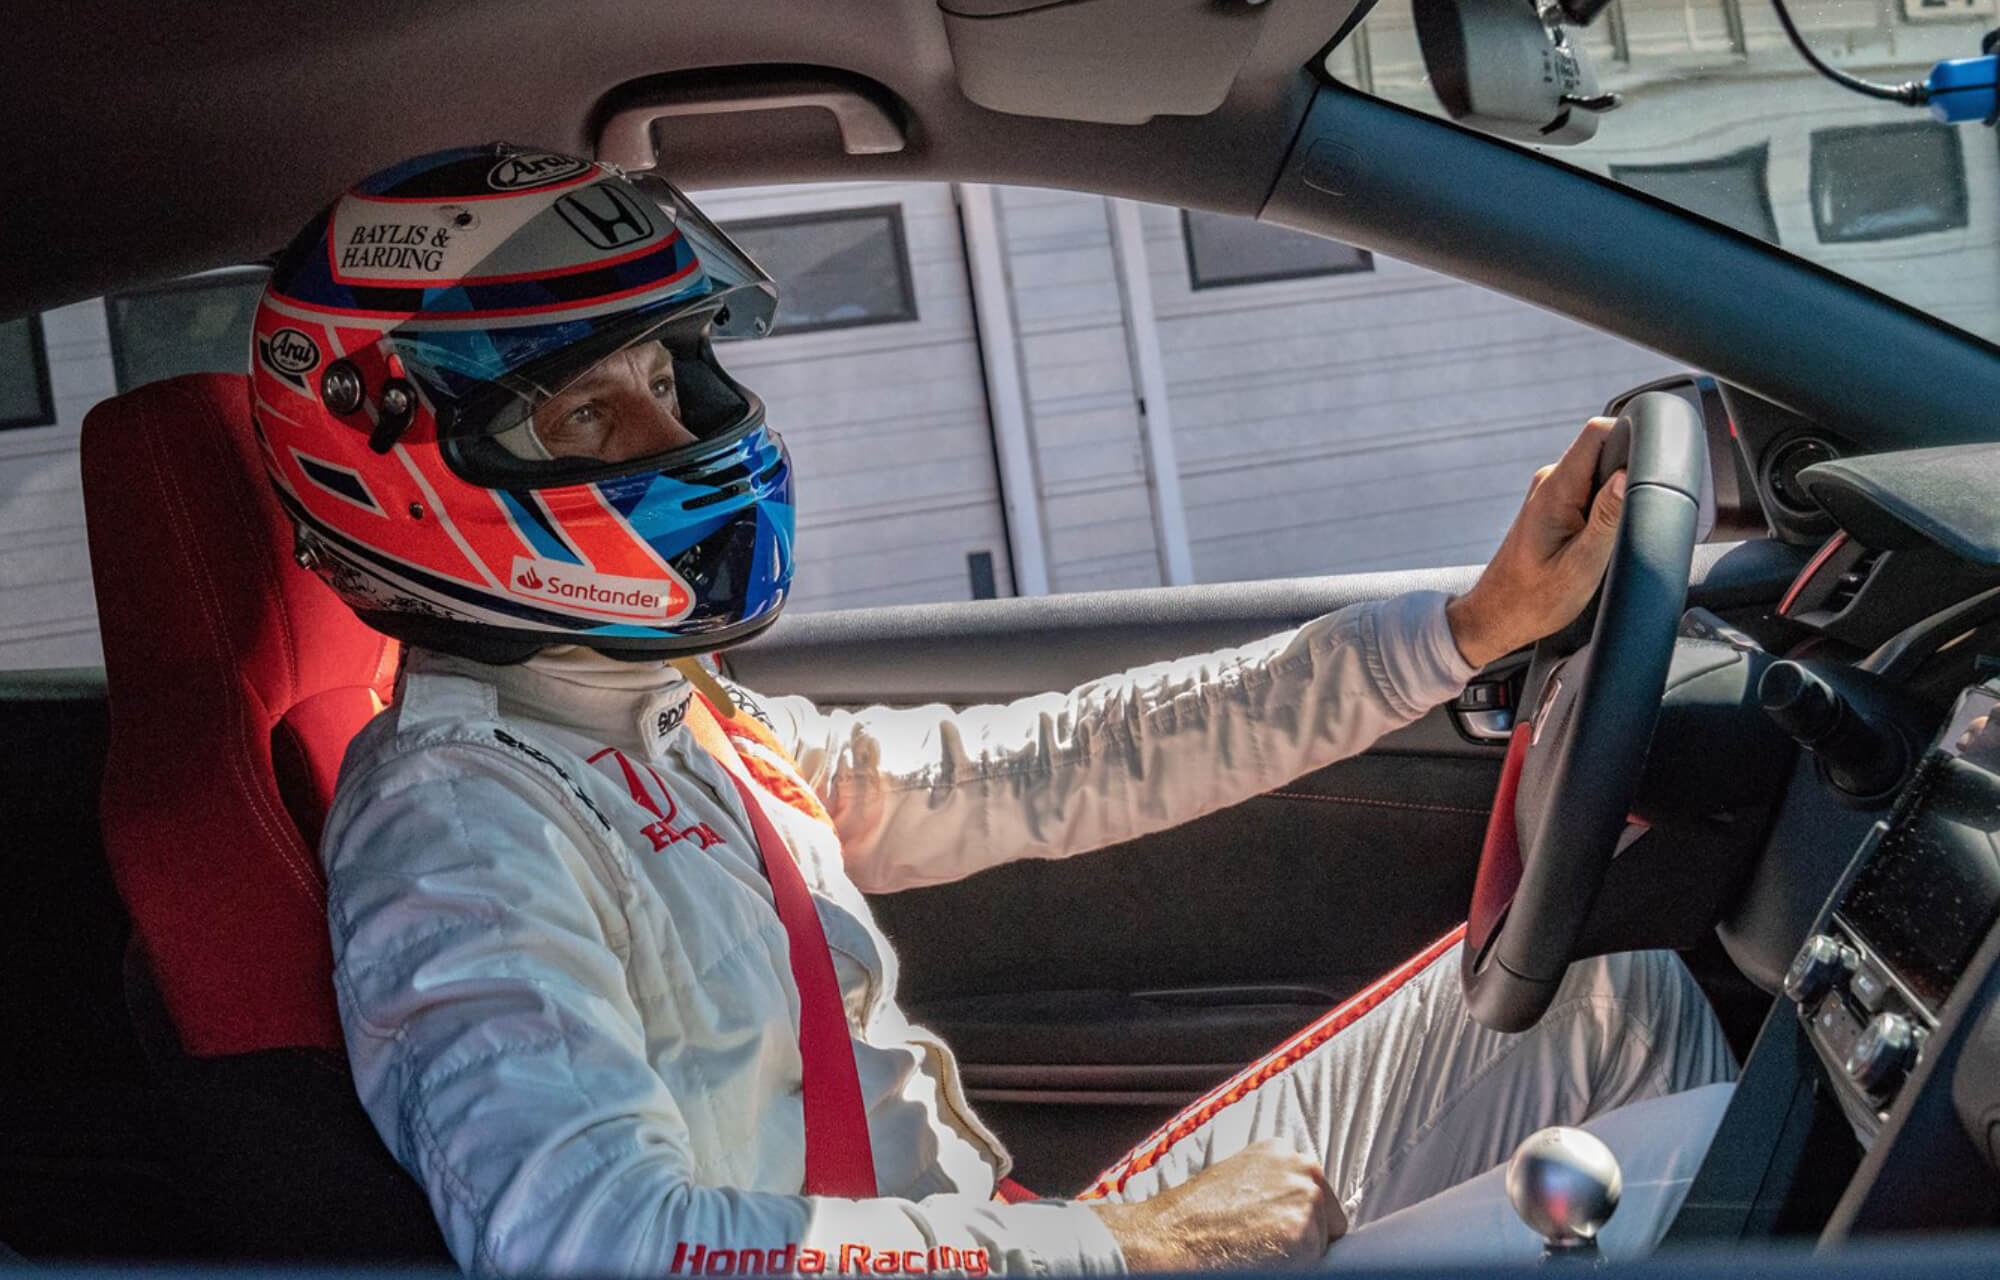 Jenson Button secures Hondas fifth and final planned lap record in Civic Type R Challenge 2018